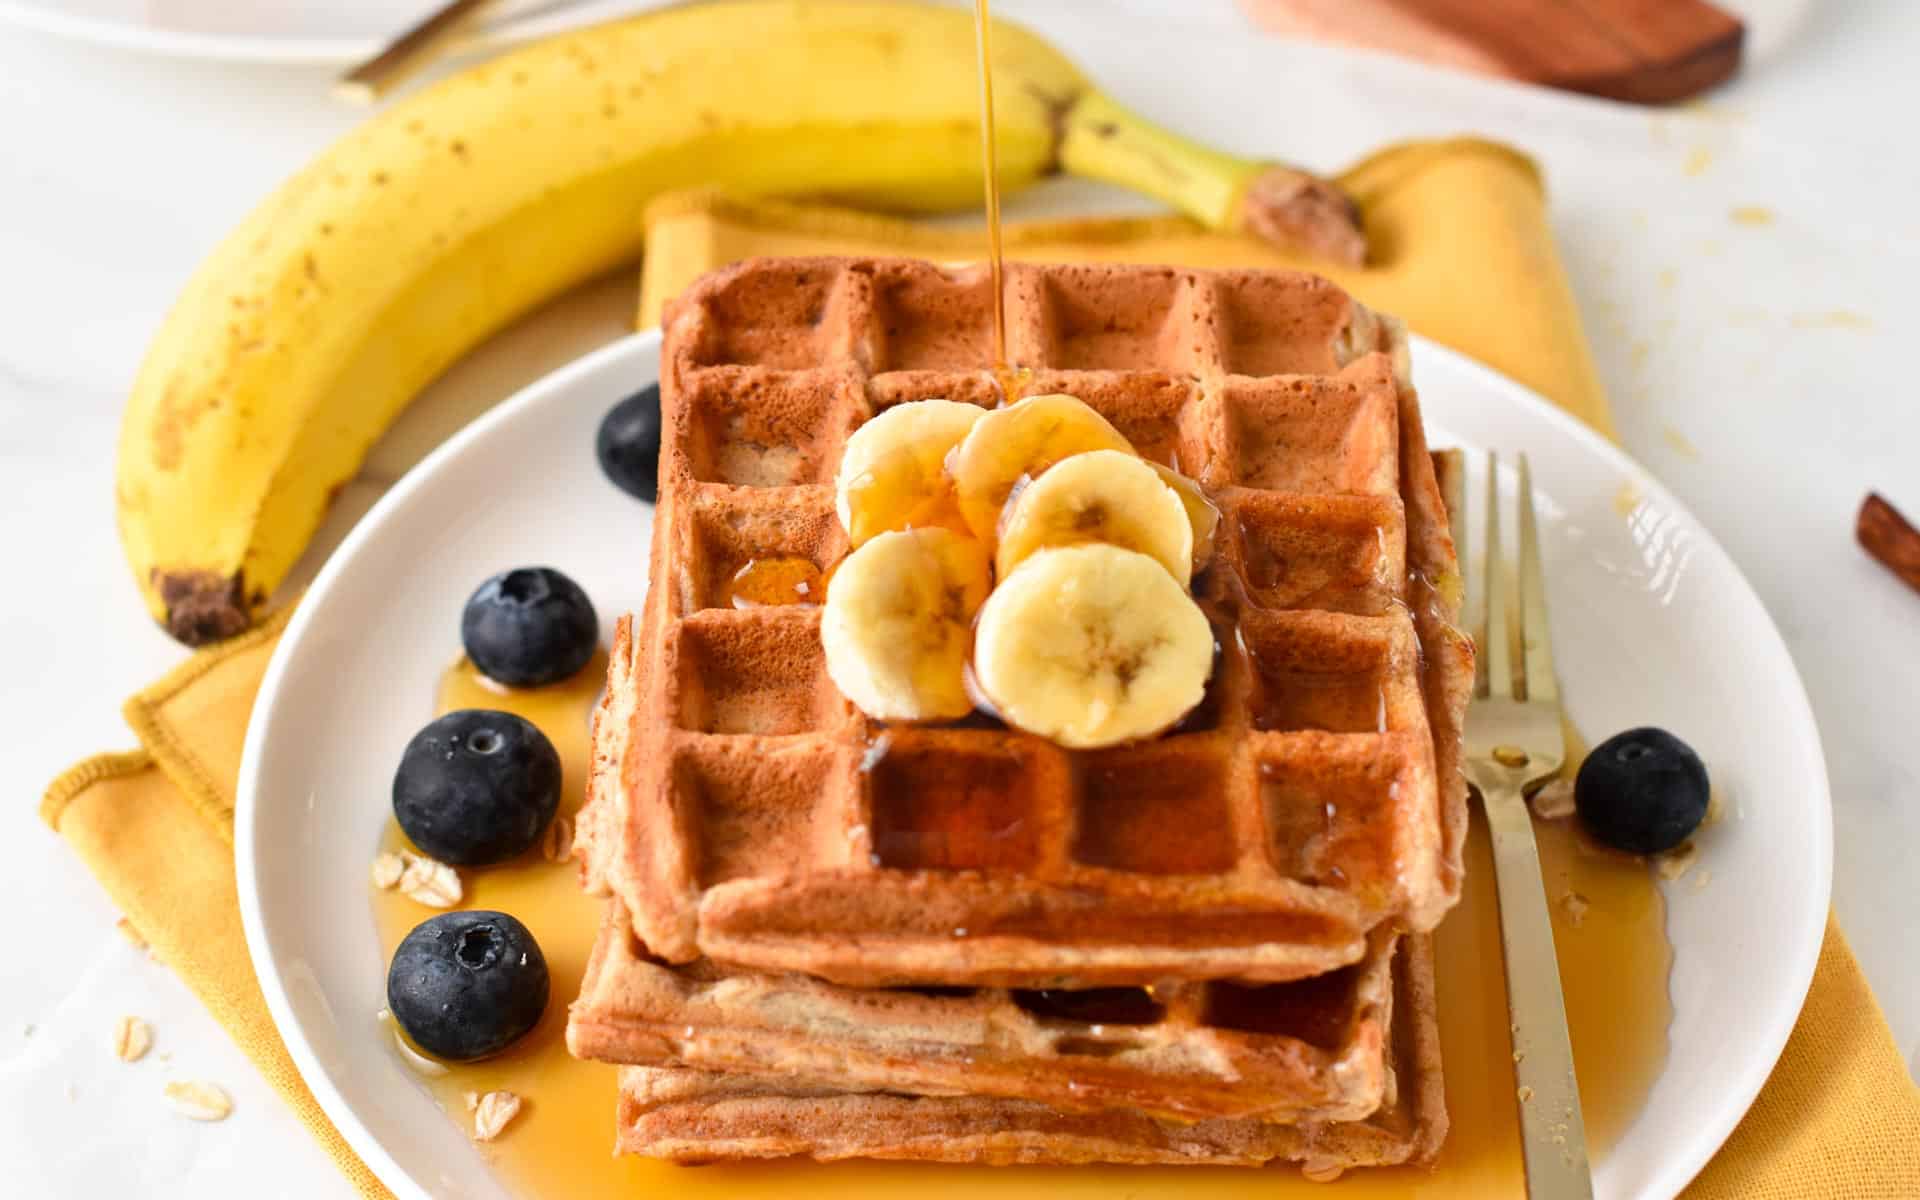 a stack of Healthy Banana Waffles with banana slices on top, blueberries around in the plate and a drizzle of syrup on top